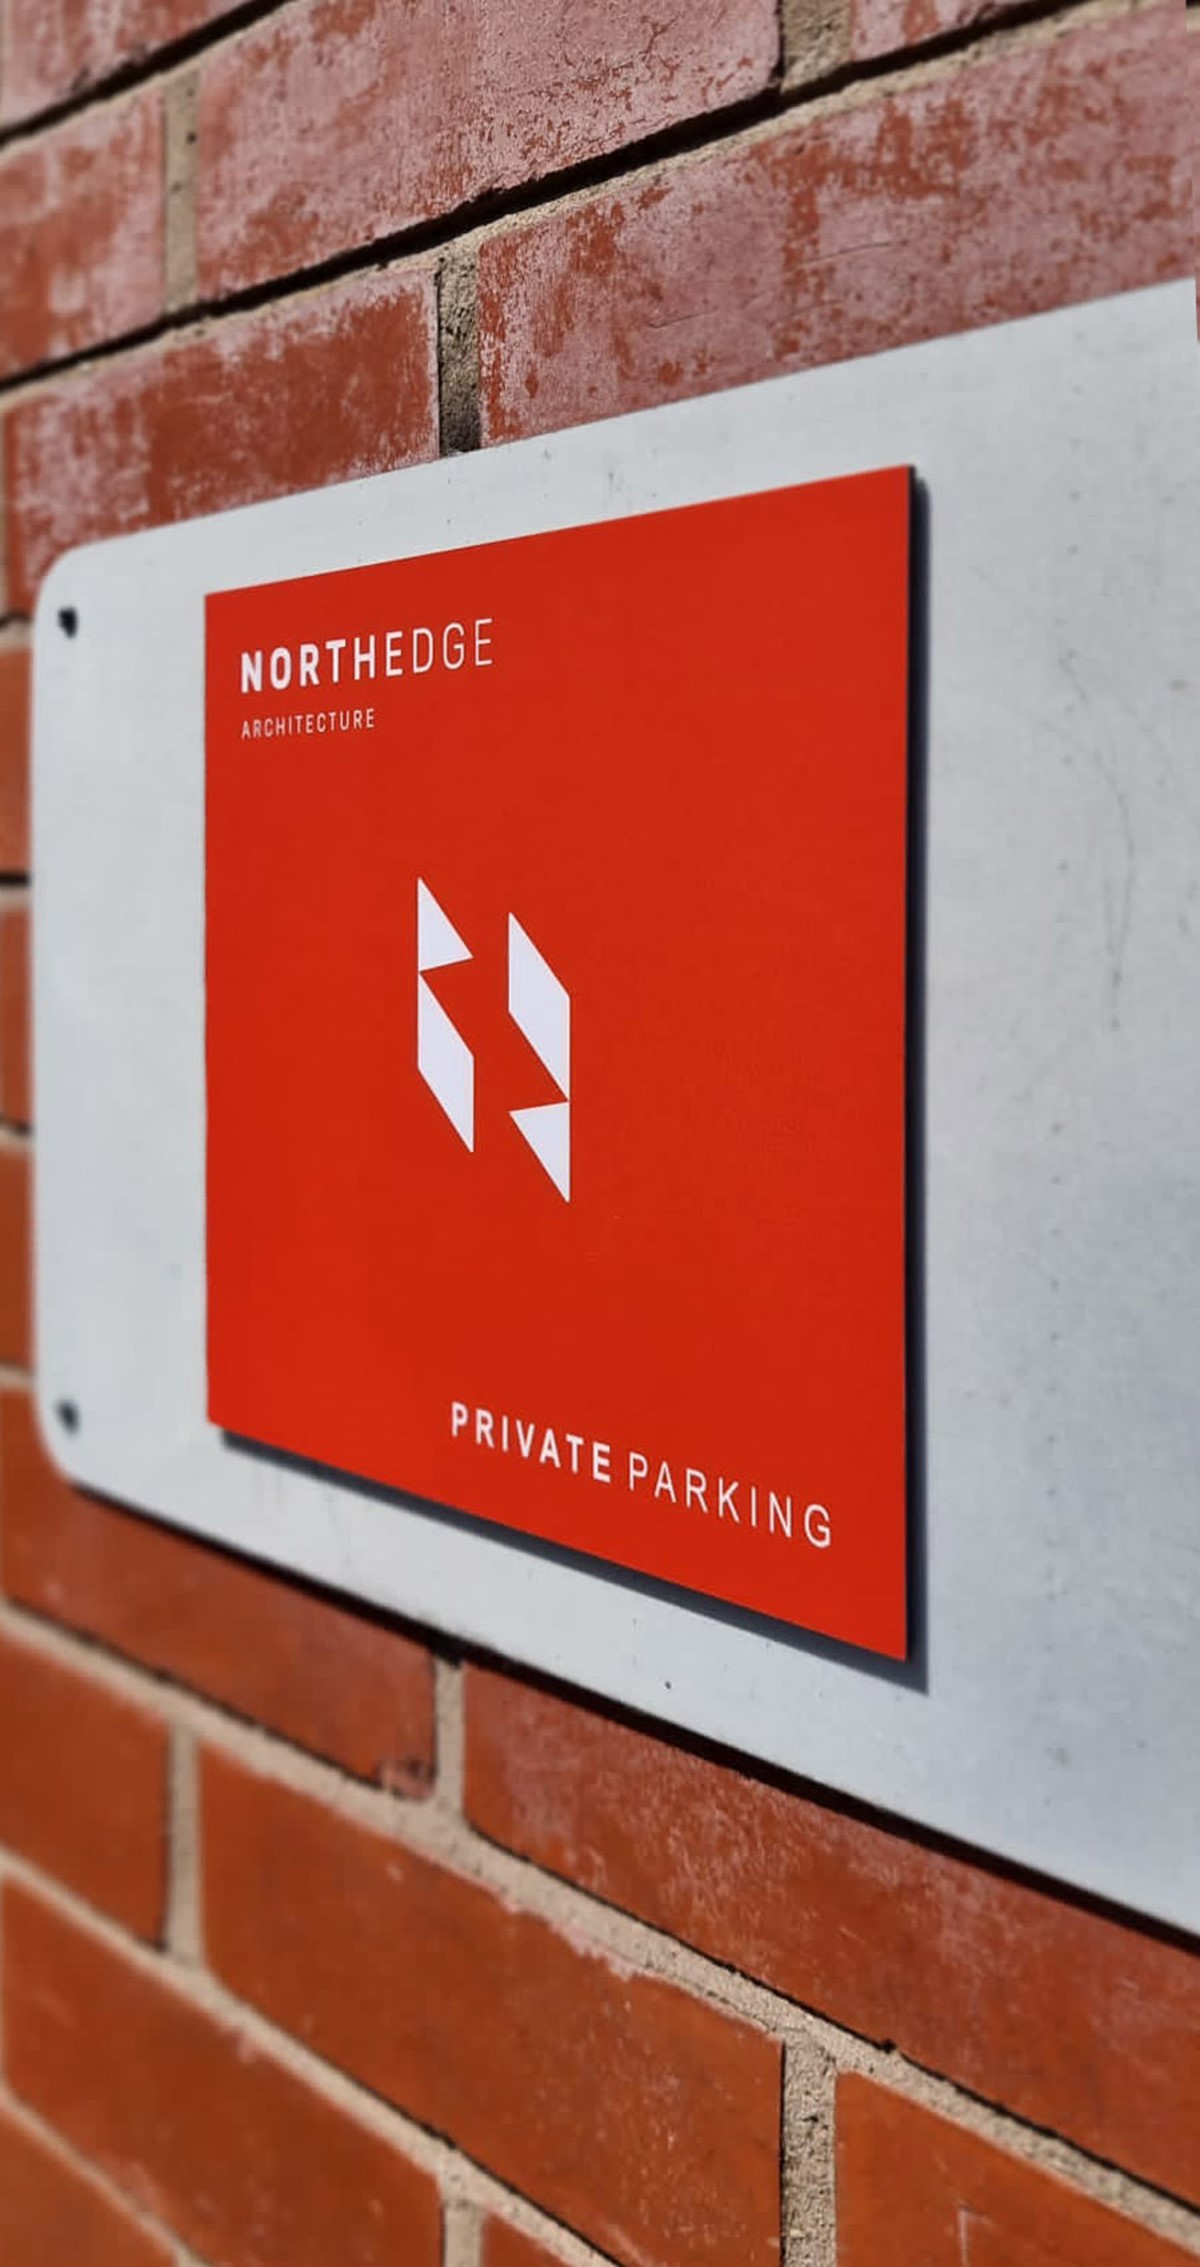 Northedge Architecture. Parking signage. Branding by design studio Superfried. Manchester.